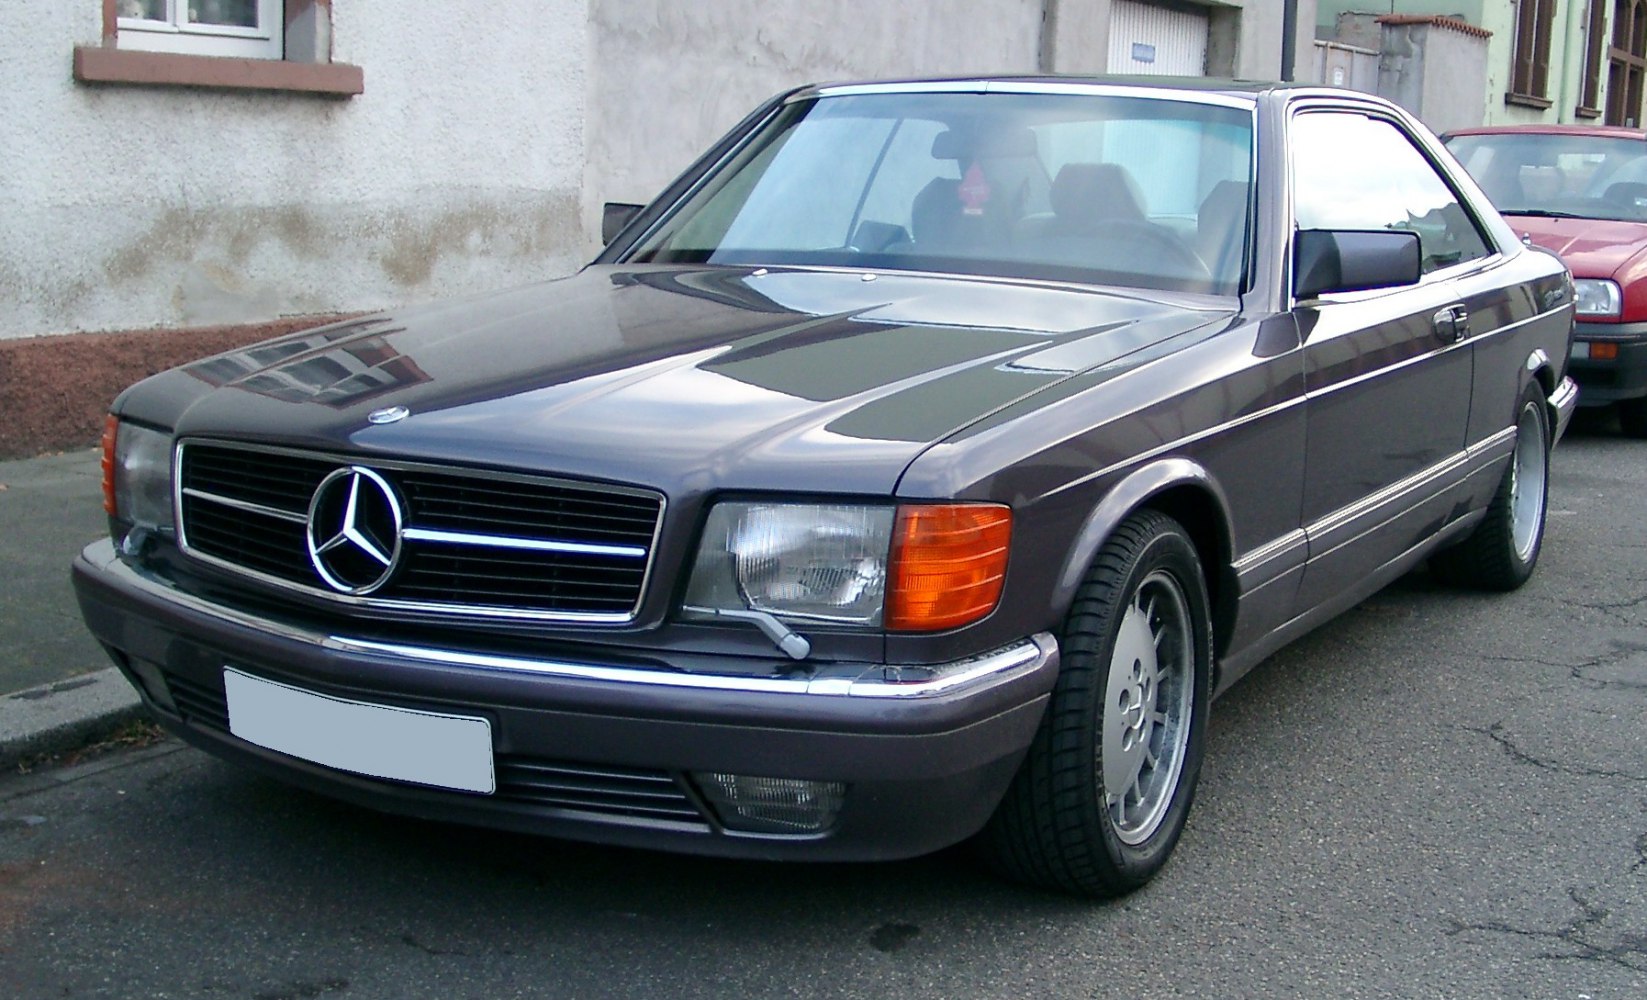 https://totalrenting.es/wp-content/uploads/2022/10/mercedes-benz-clase-s-coupe-c126-facelift-1985-1985-420-sec-v8-cat-224-cv-automatic-coupe.png